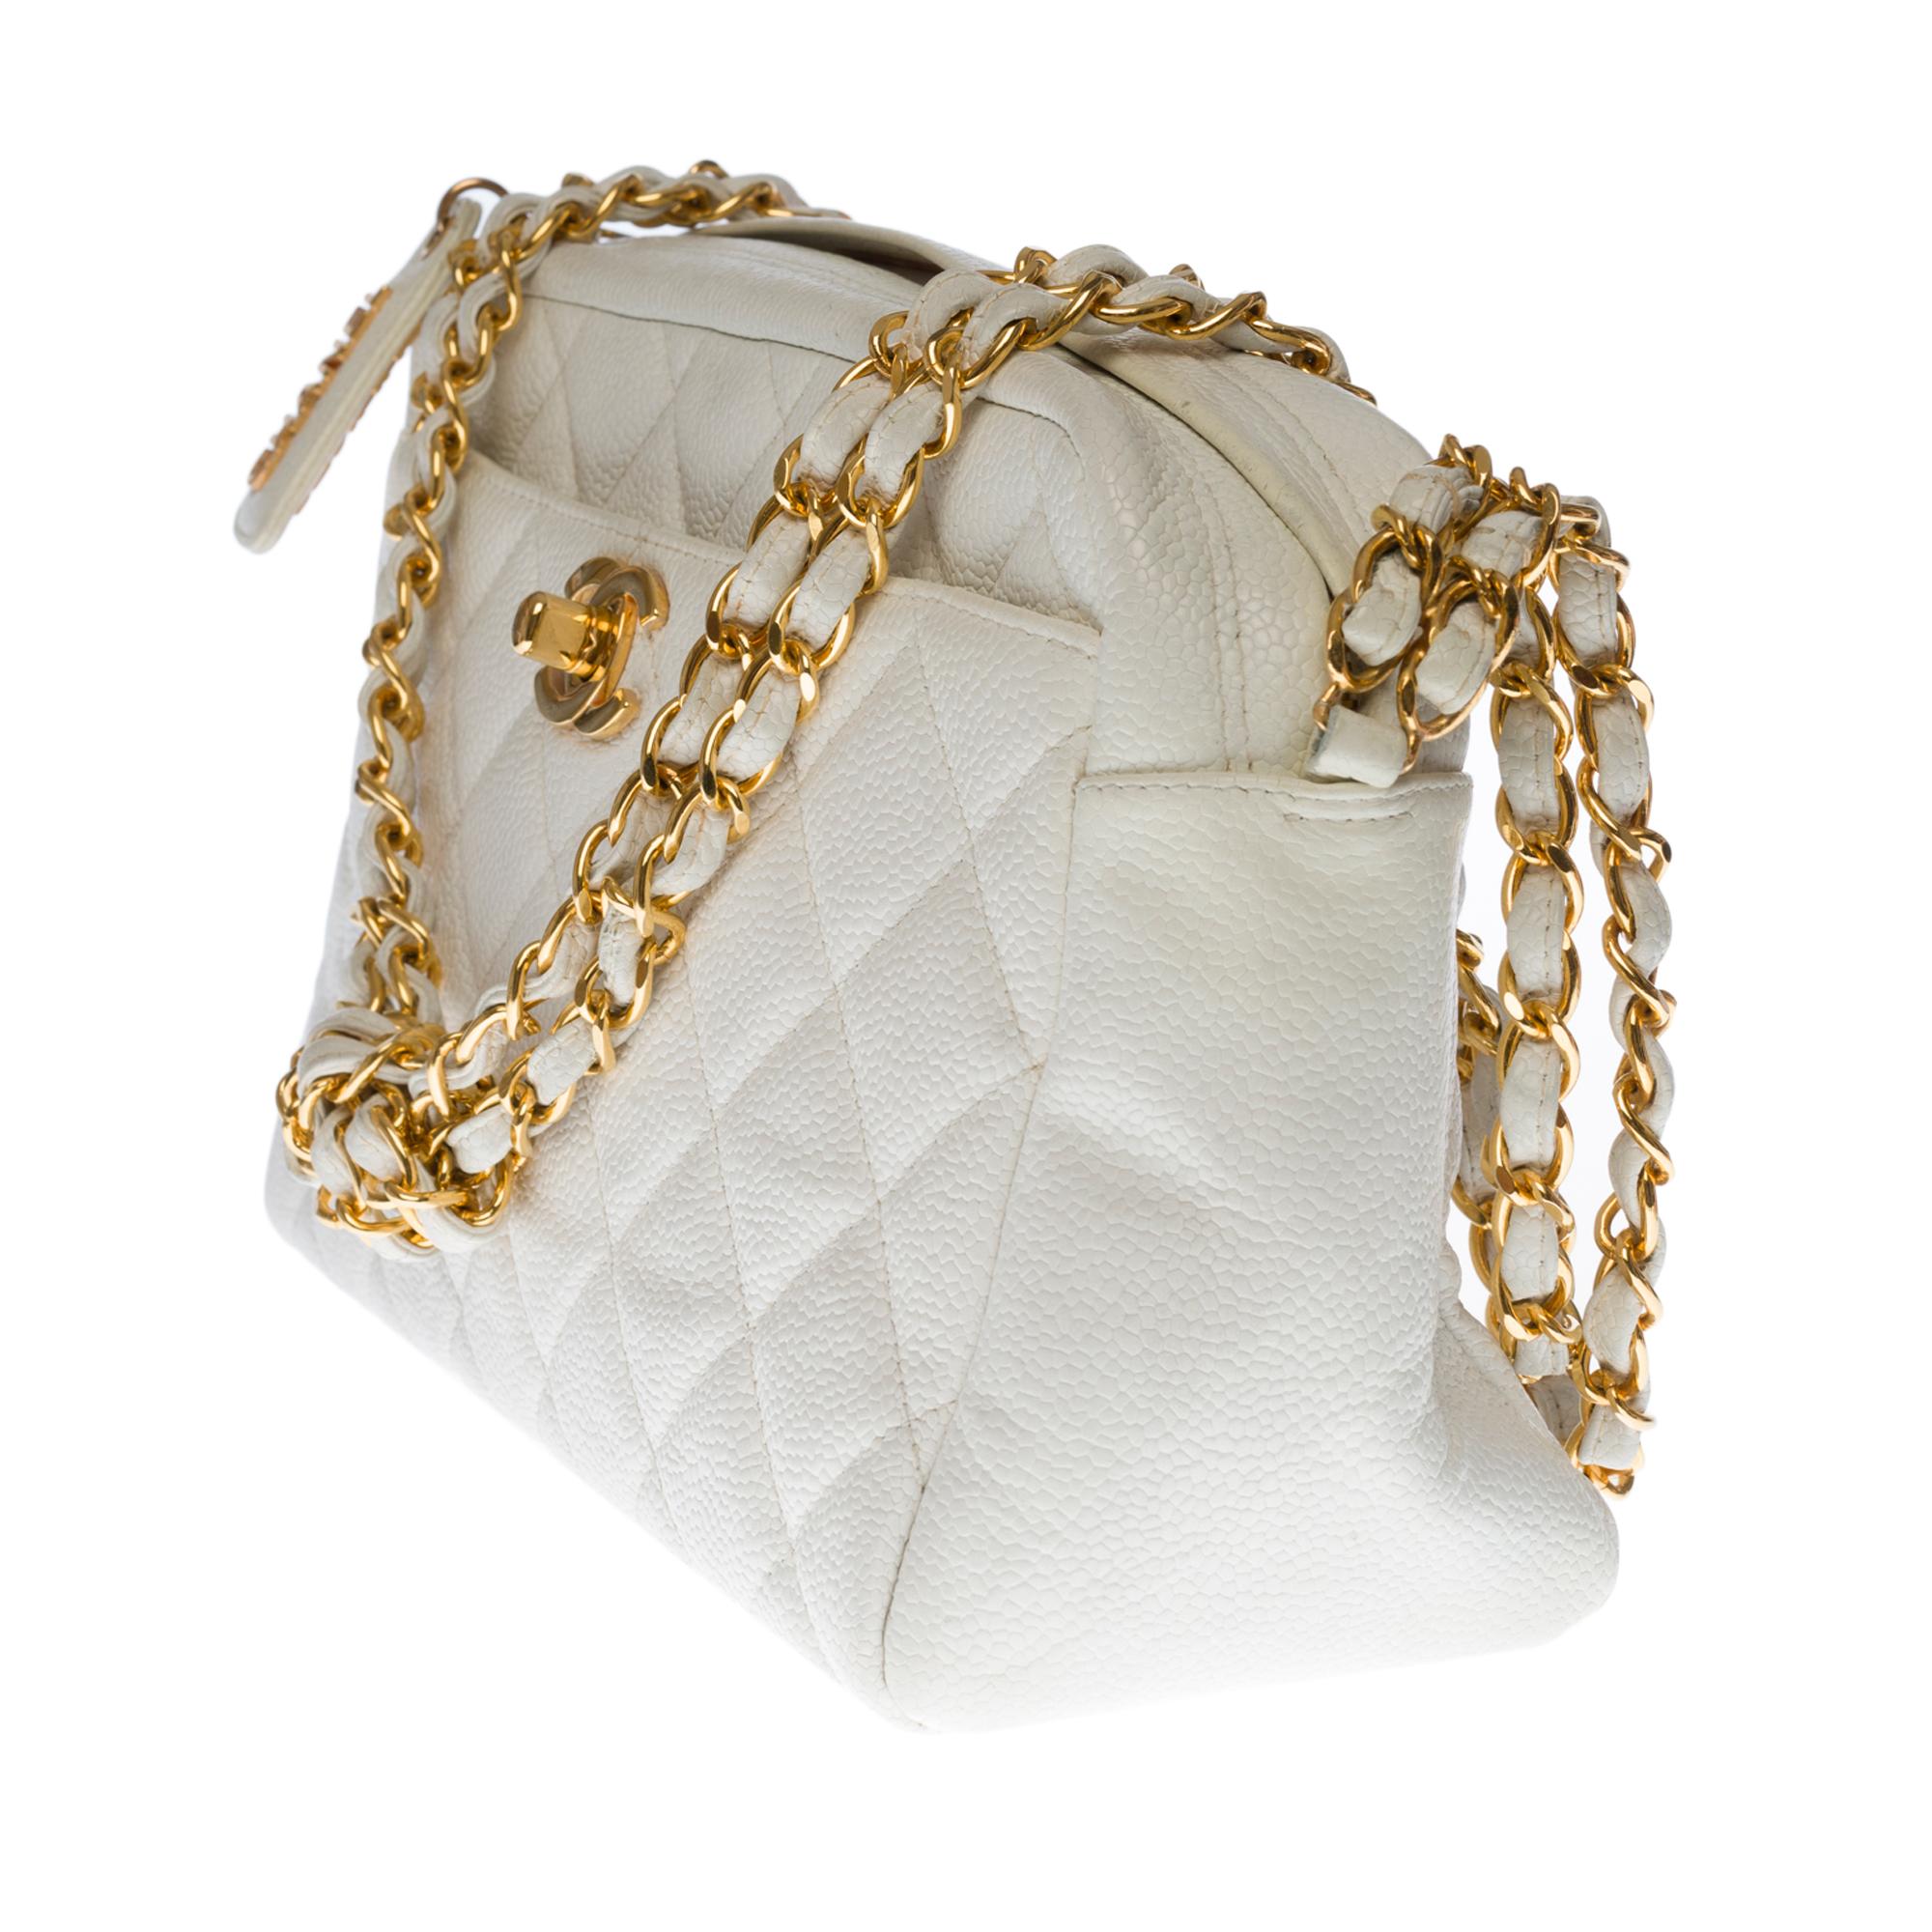 Gray Stunning Chanel Classic shoulder bag in white caviar quilted leather, GHW